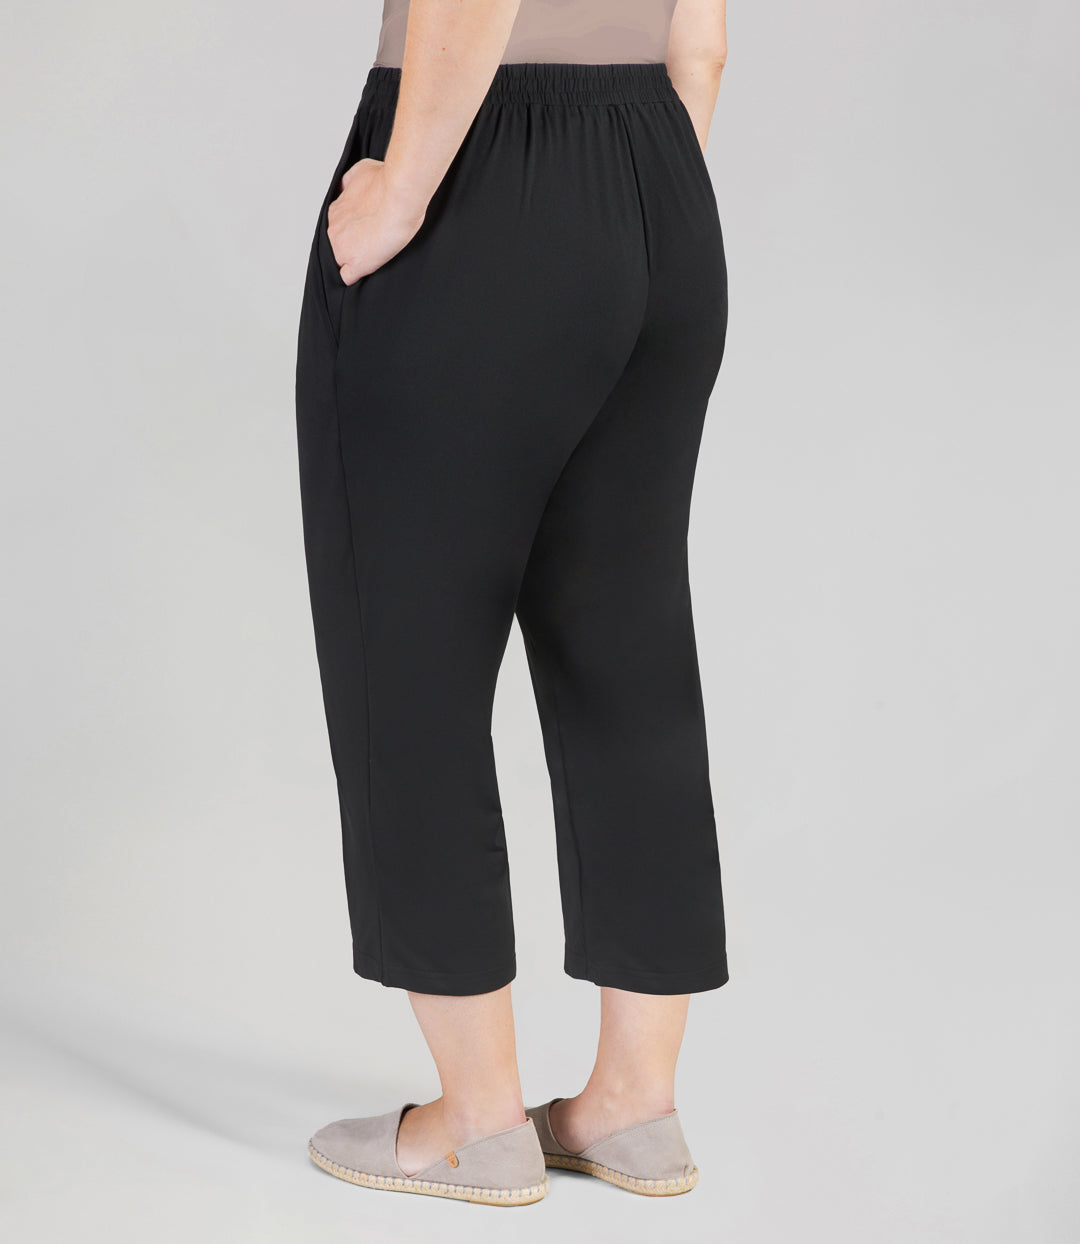 Back view, bottom half of plus sized woman, wearing JunoActives SoftWik Relaxed Fit Long Capris with Pockets in black. Hemline ends at mid-calf of model.